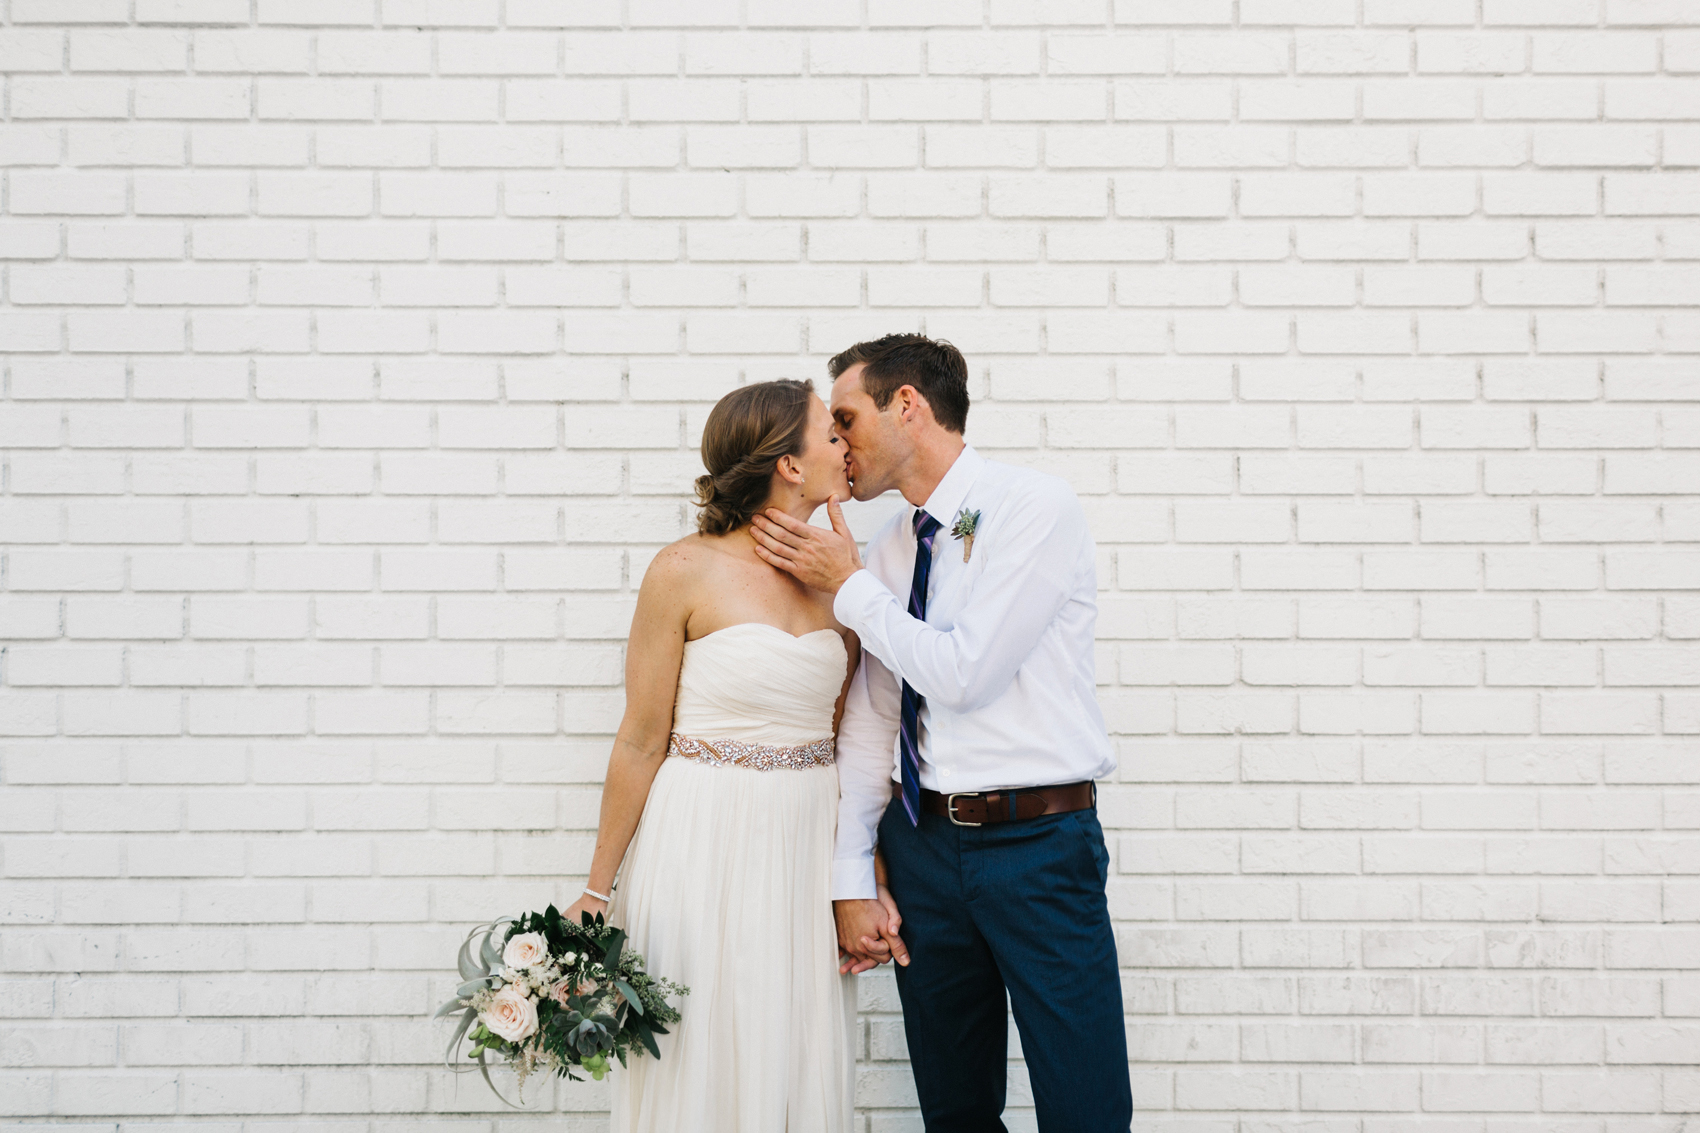 St. Pete Wedding Photographer with natural light, candid wedding photos against a brewery white brick wall